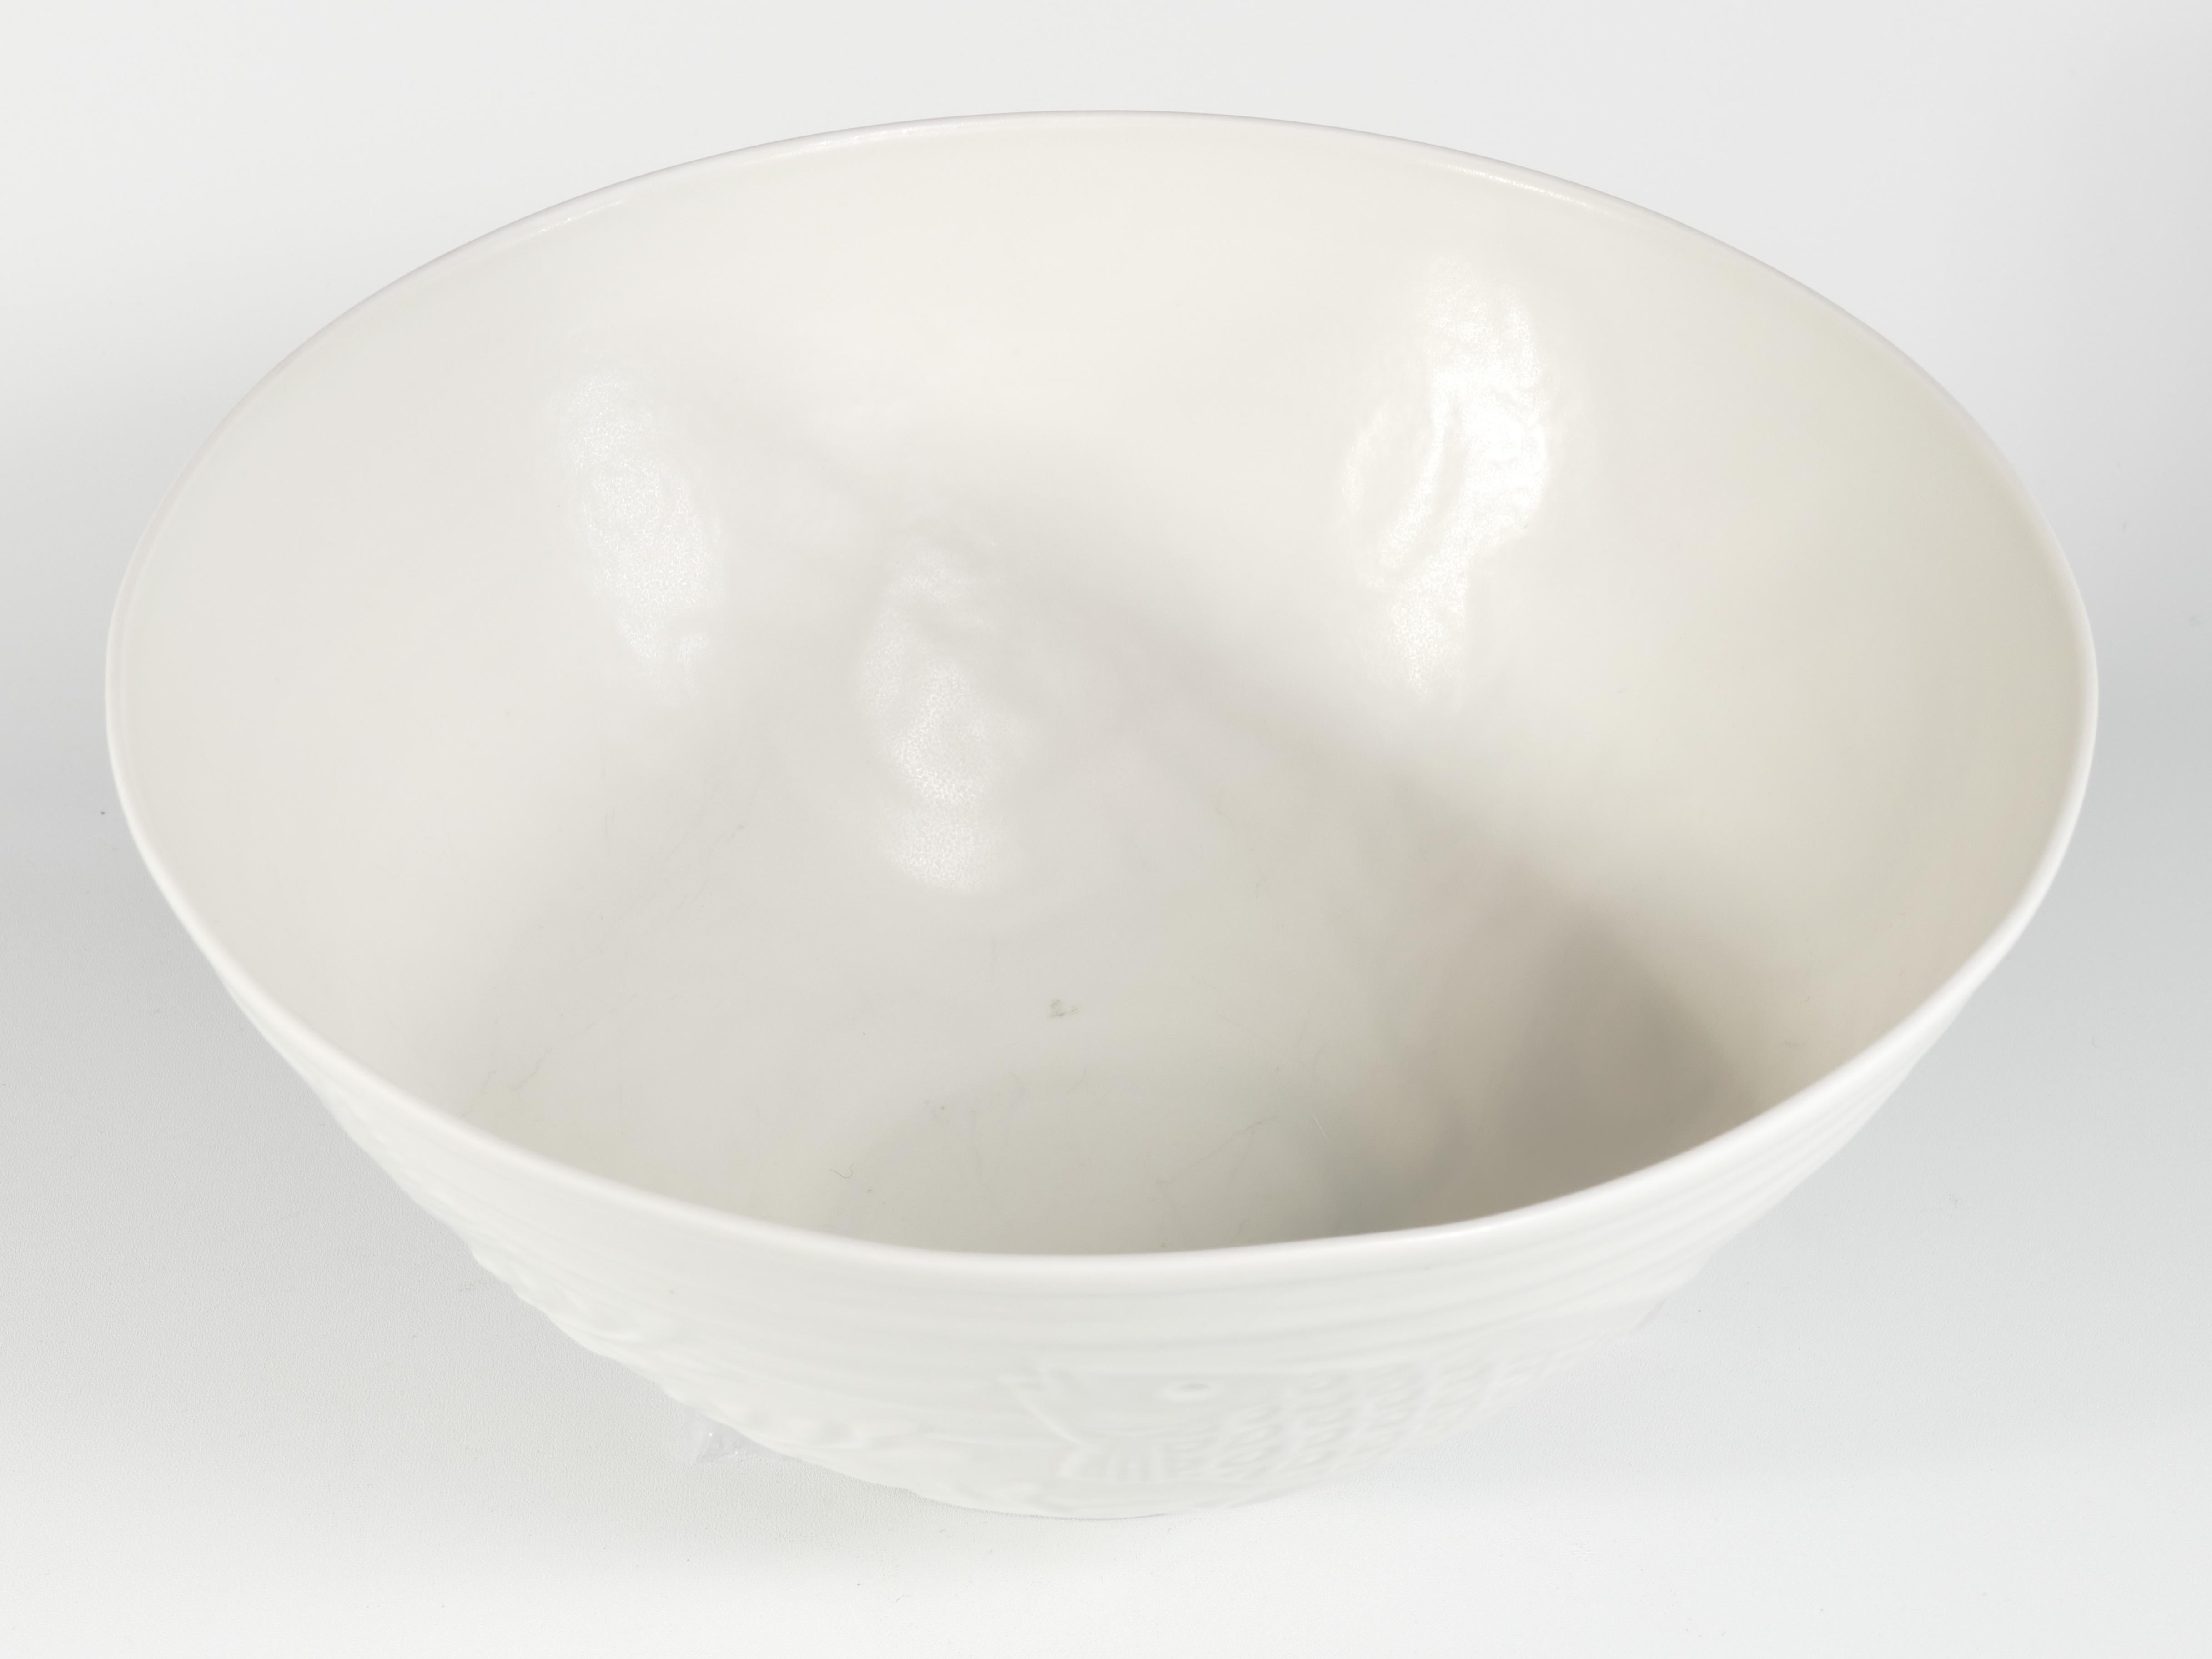 Swedish Grace White Porcelain Sea Themed  Bowl by Gunnar Nylund for ALP, 1940's For Sale 8